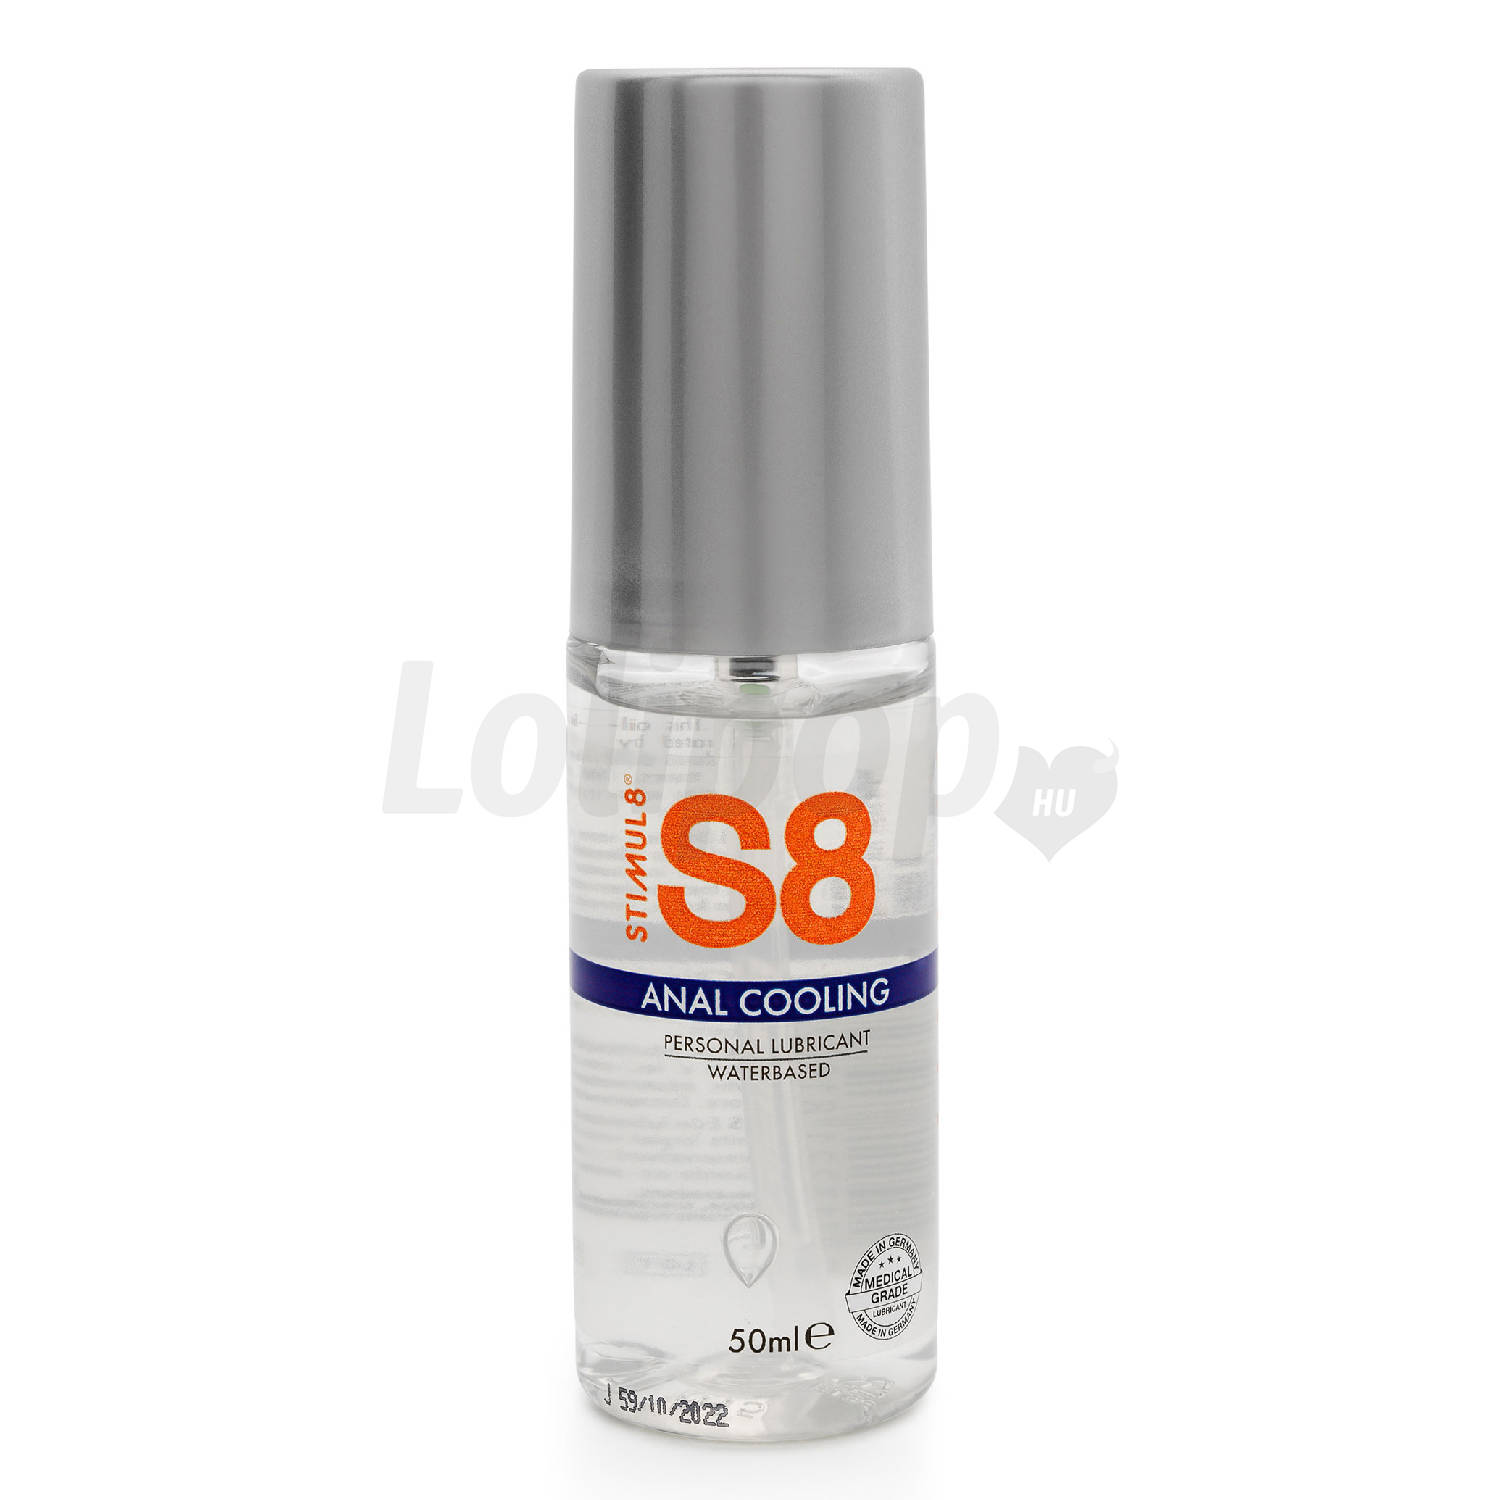 Stimul8 Anal Cooling Lubricant Waterbased